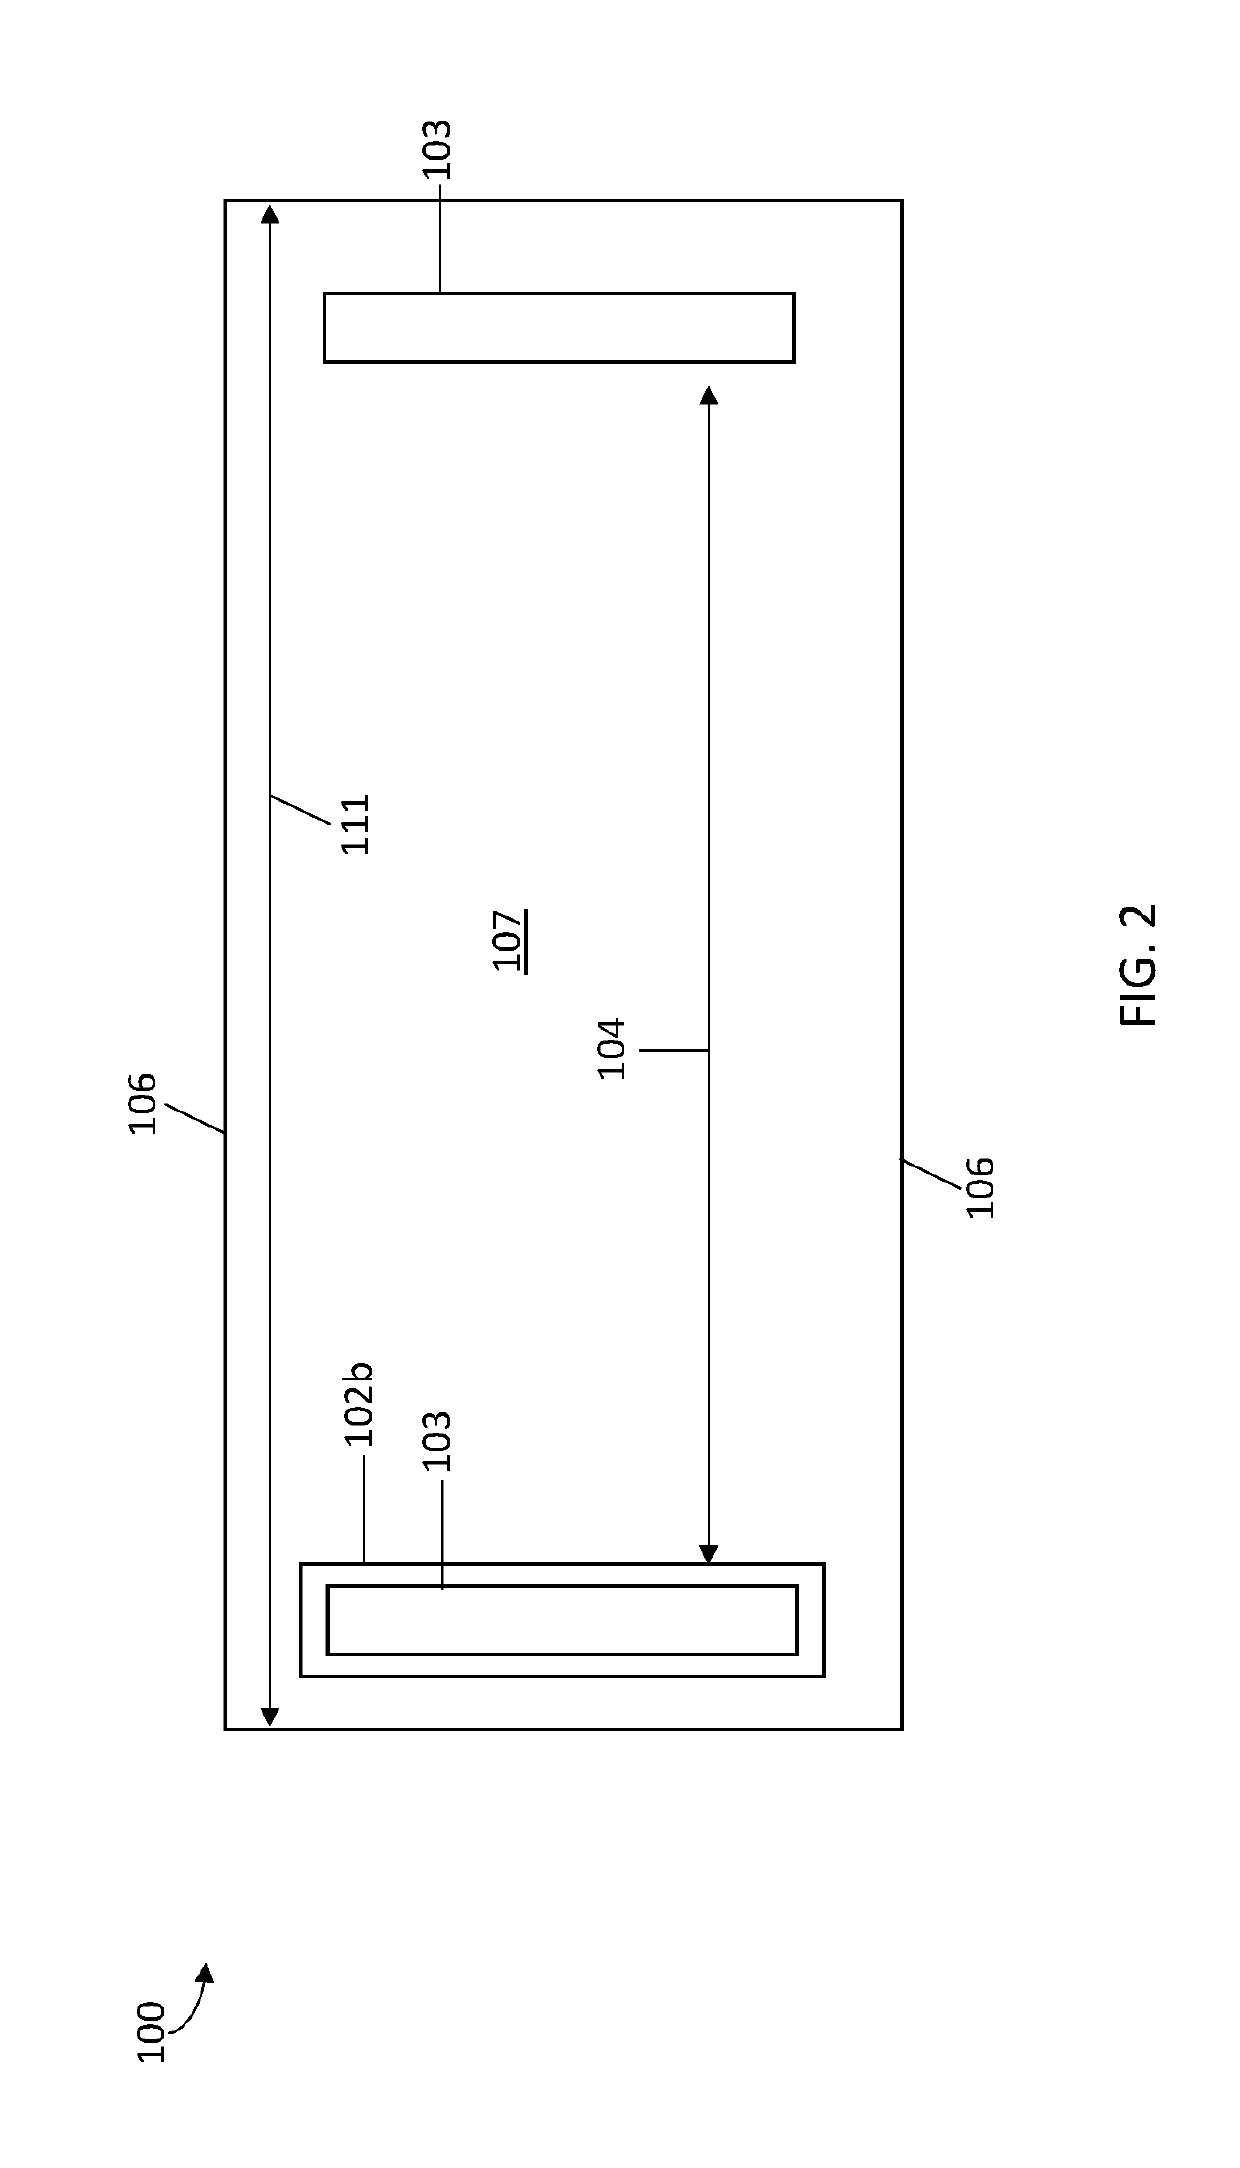 Apparatus for Warming Appendages During Outdoor Activities